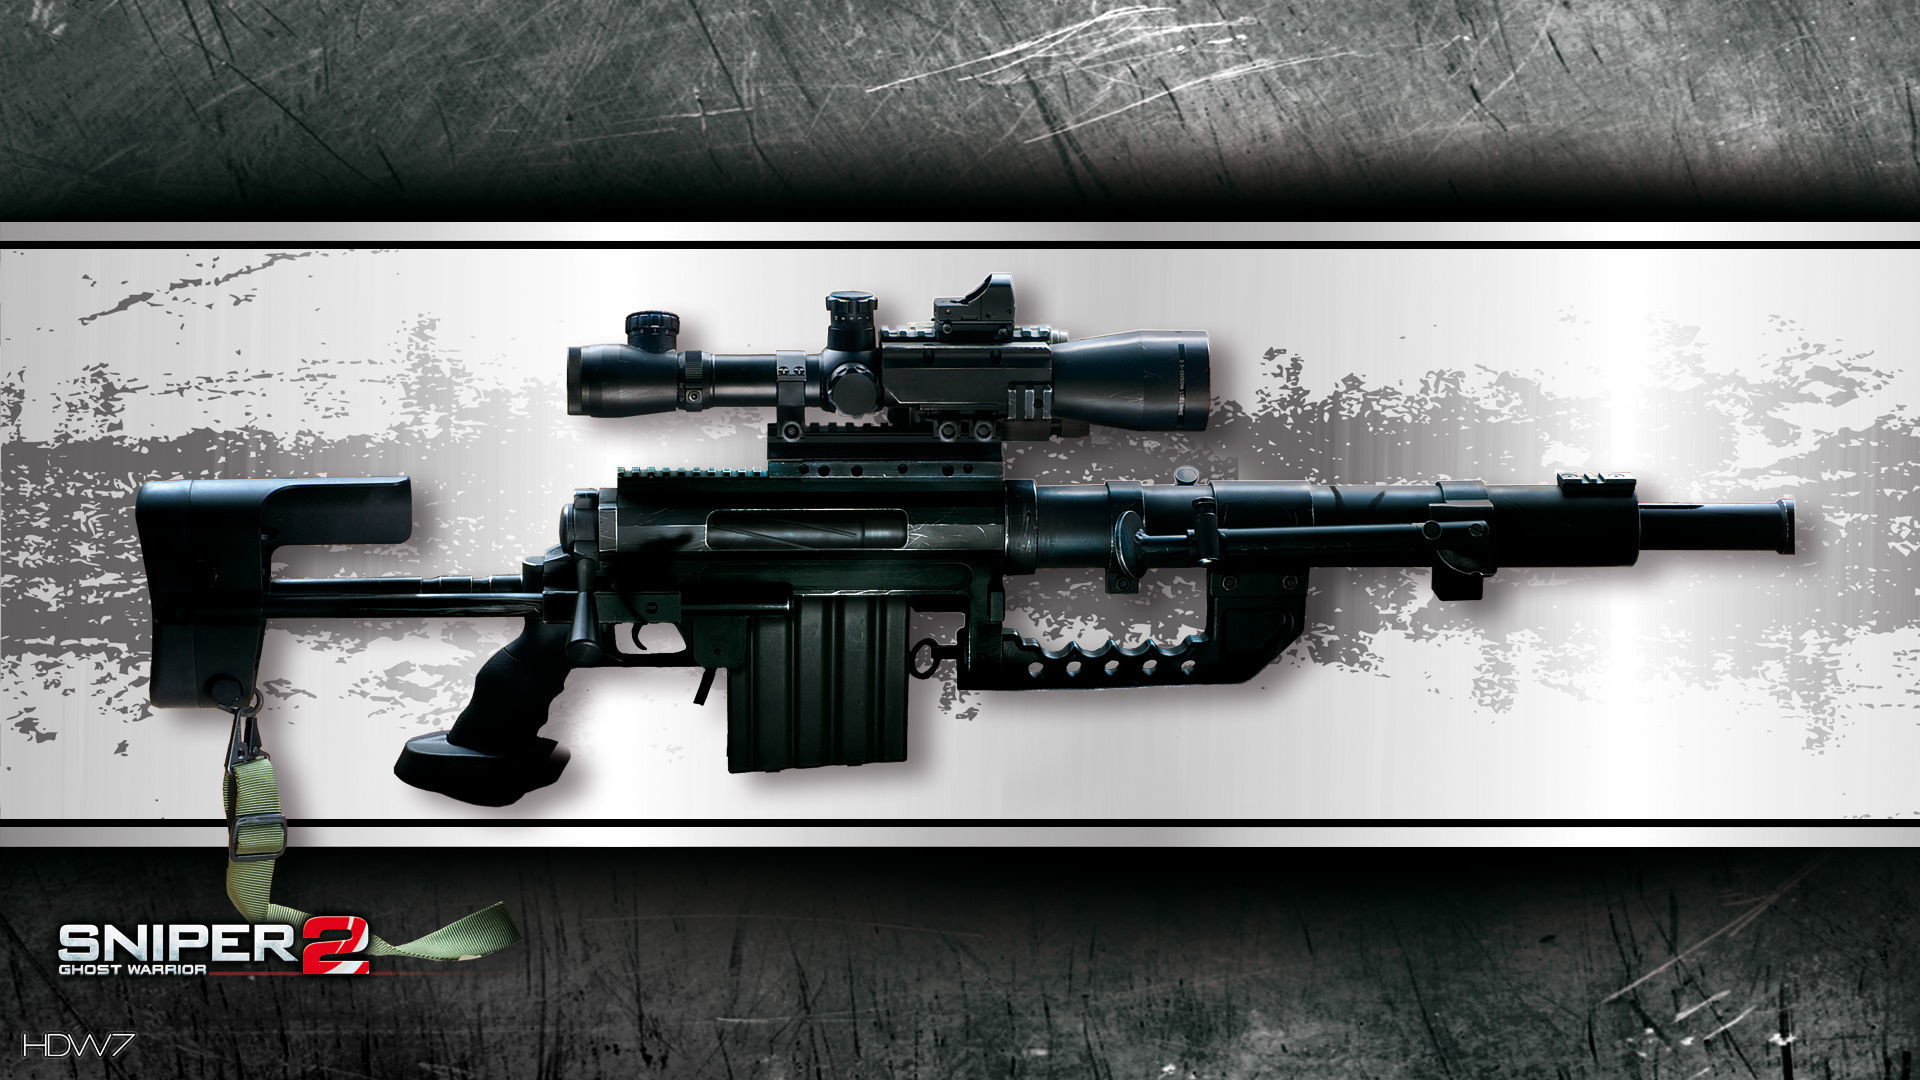 1920x1080 ... Sniper Rifle wallpapers, Weapons, HQ Sniper Rifle pictures | 4K .